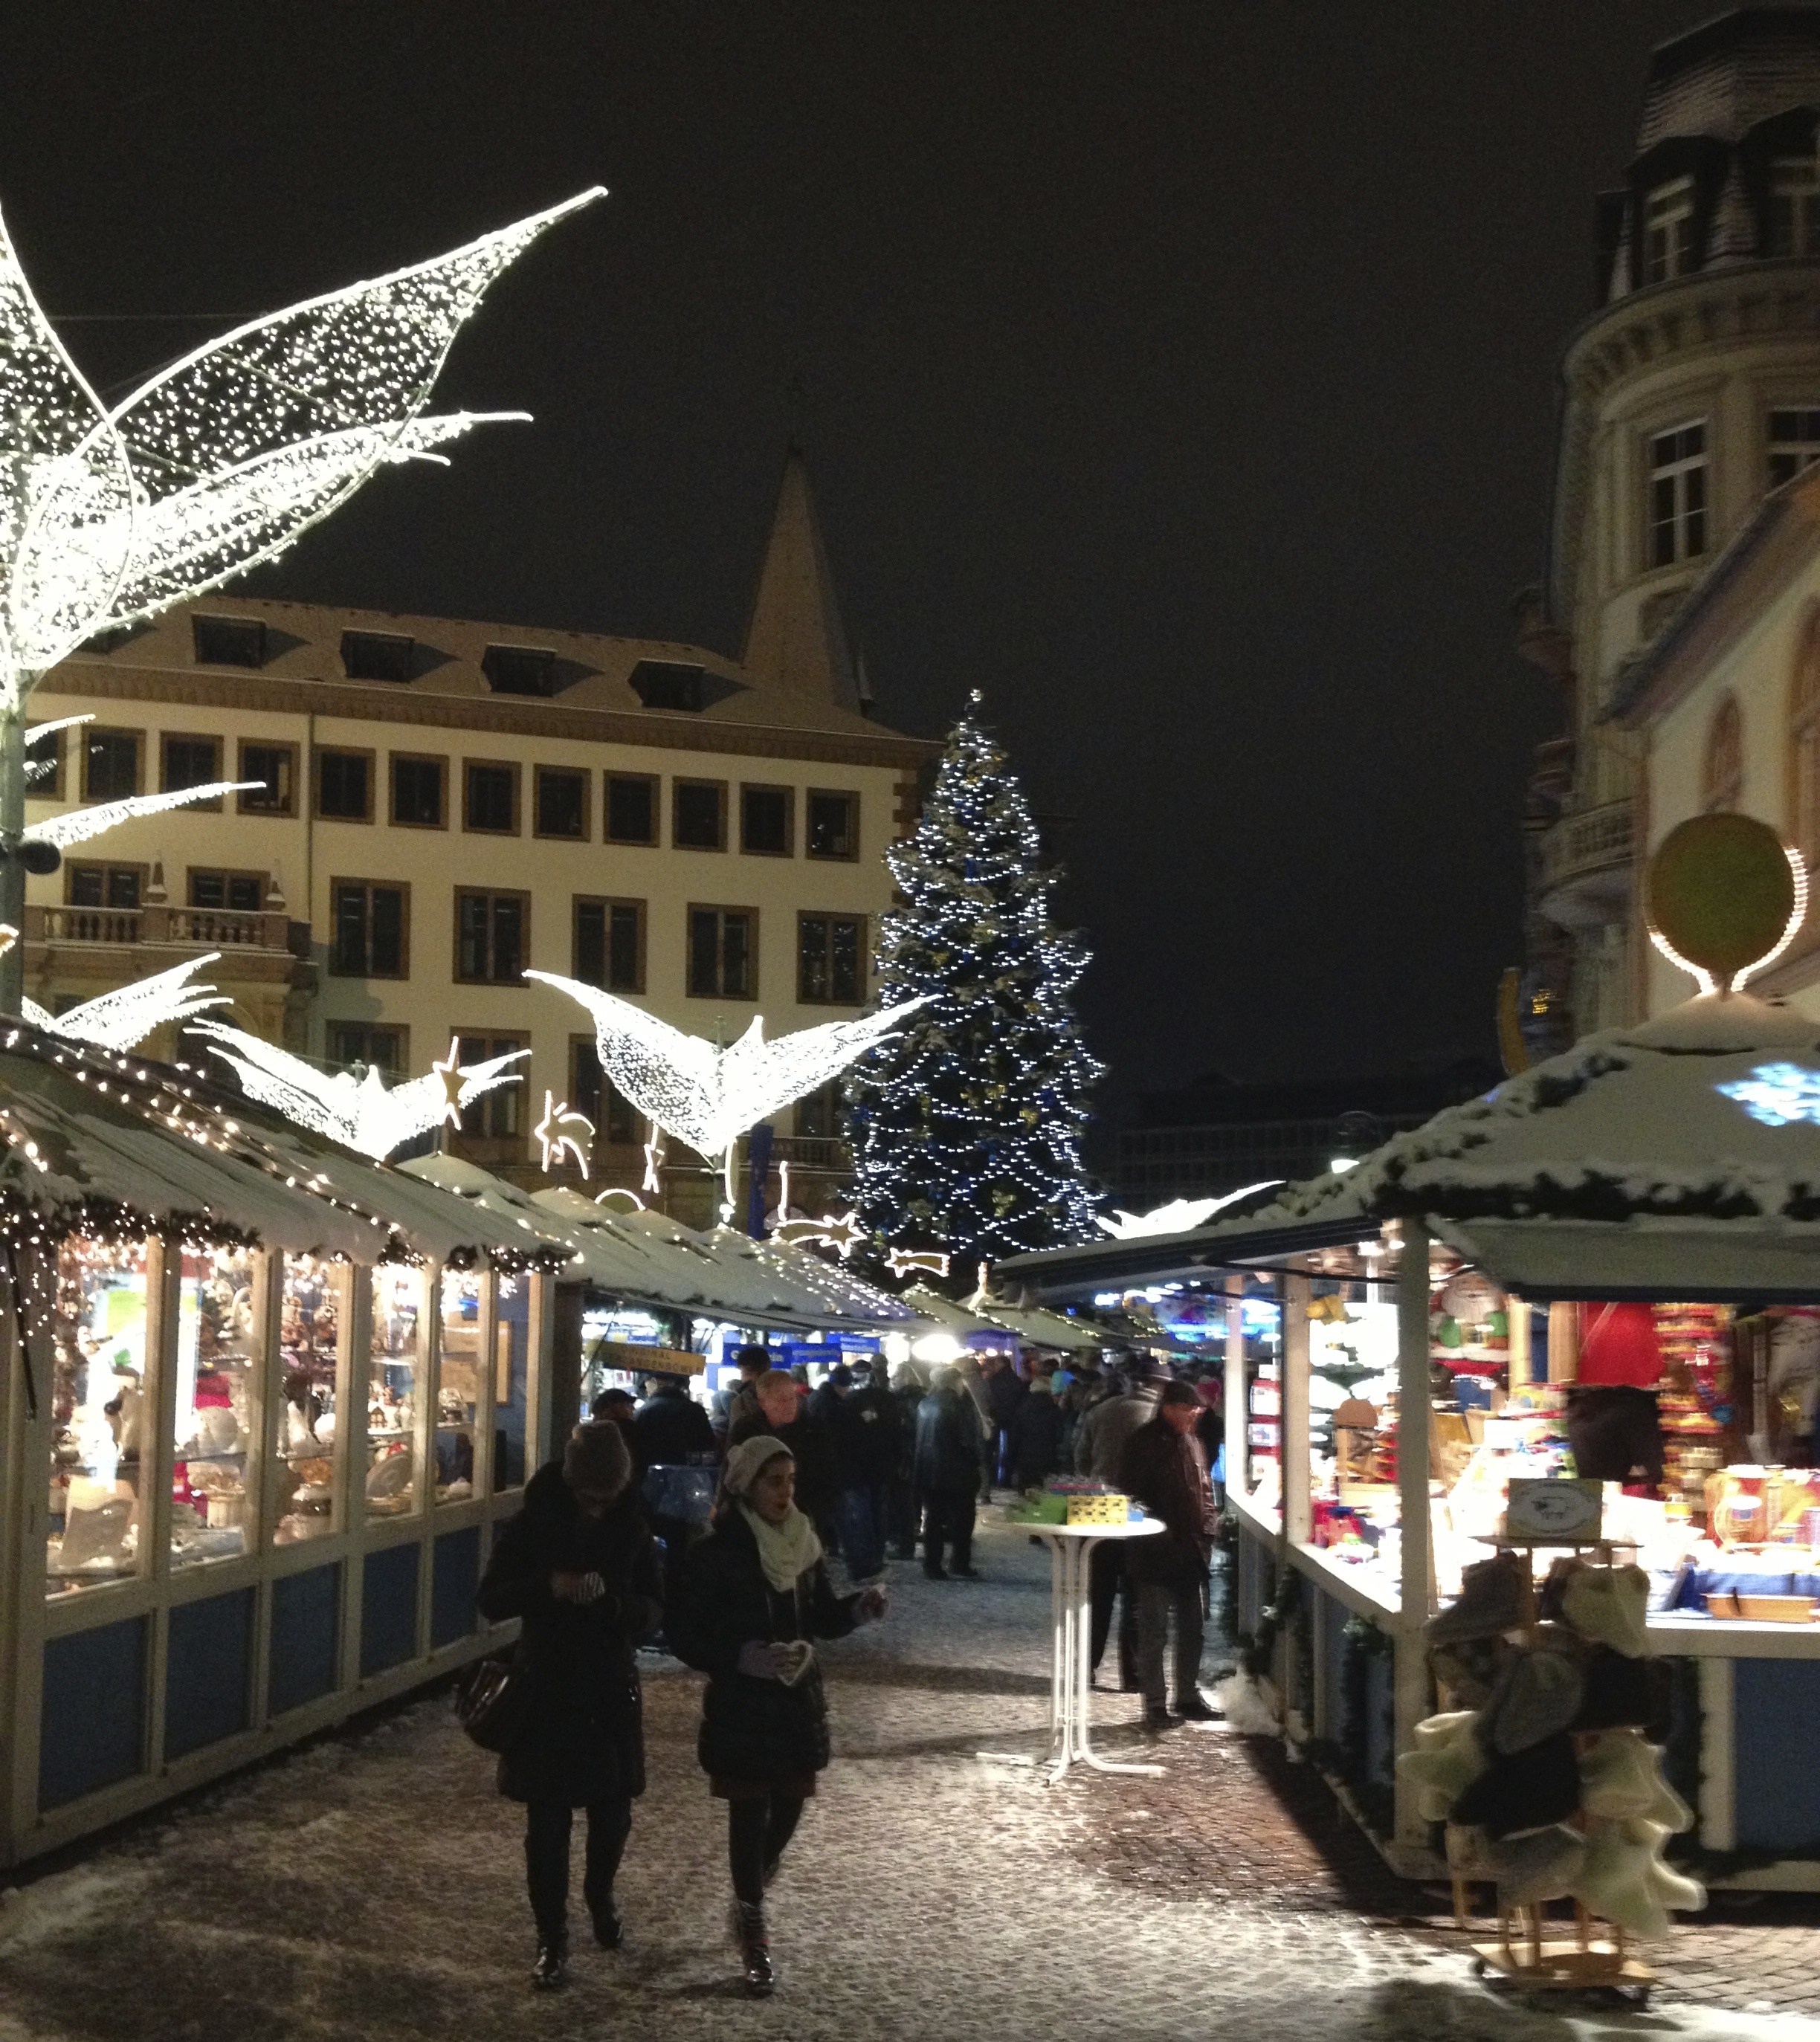 The 5 Best Things About Christmas Markets!